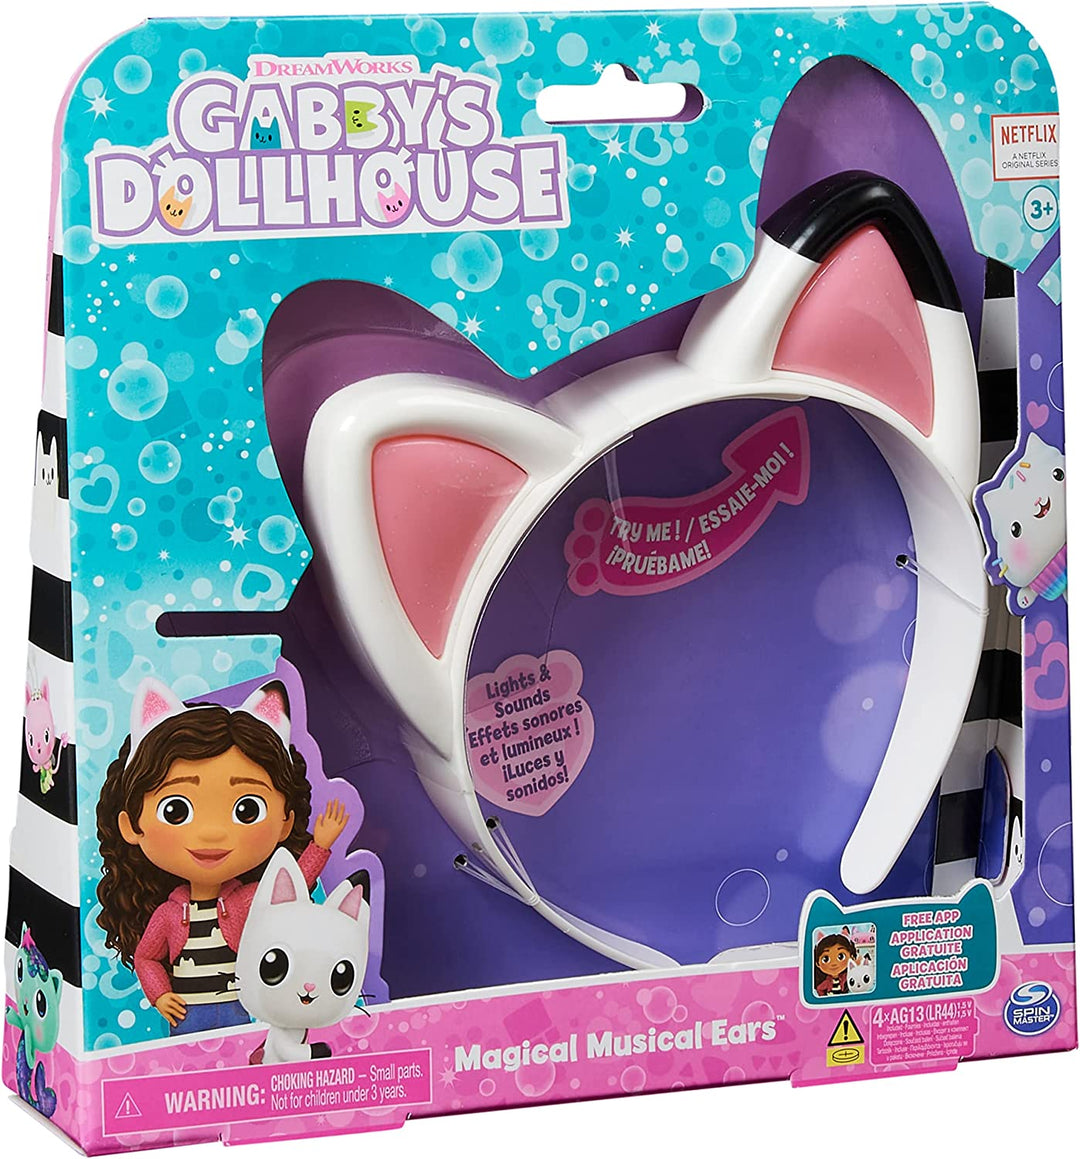 Gabby’s Dollhouse, Magical Musical Cat Ears with Lights, Music, Sounds and Phras